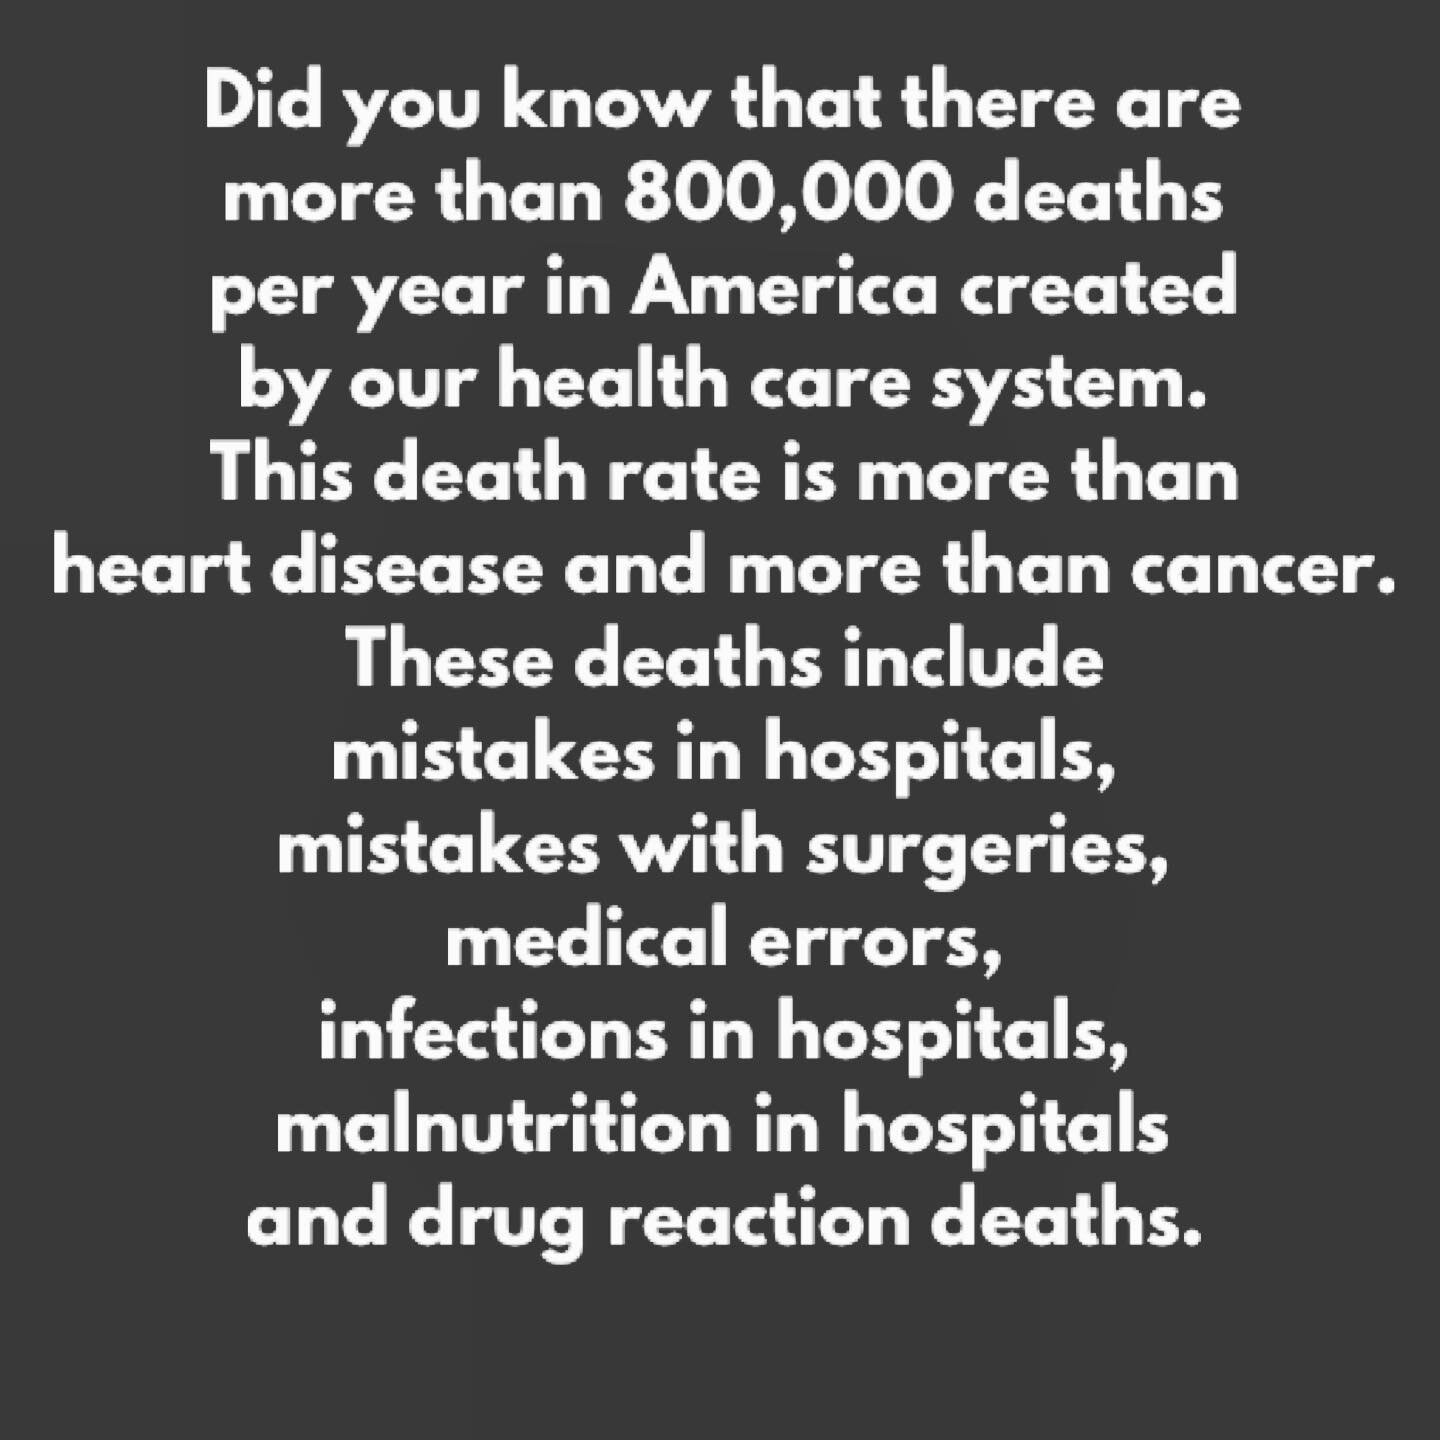 Did you know?
The book Death By Medicine sheds light on  the deaths in the health care system. 

#healthy #popular #fitness #goodtoknow #naturalcures #change 
#ketorecipes #takecontrolofyourhealth #workitout #healthyviews4u